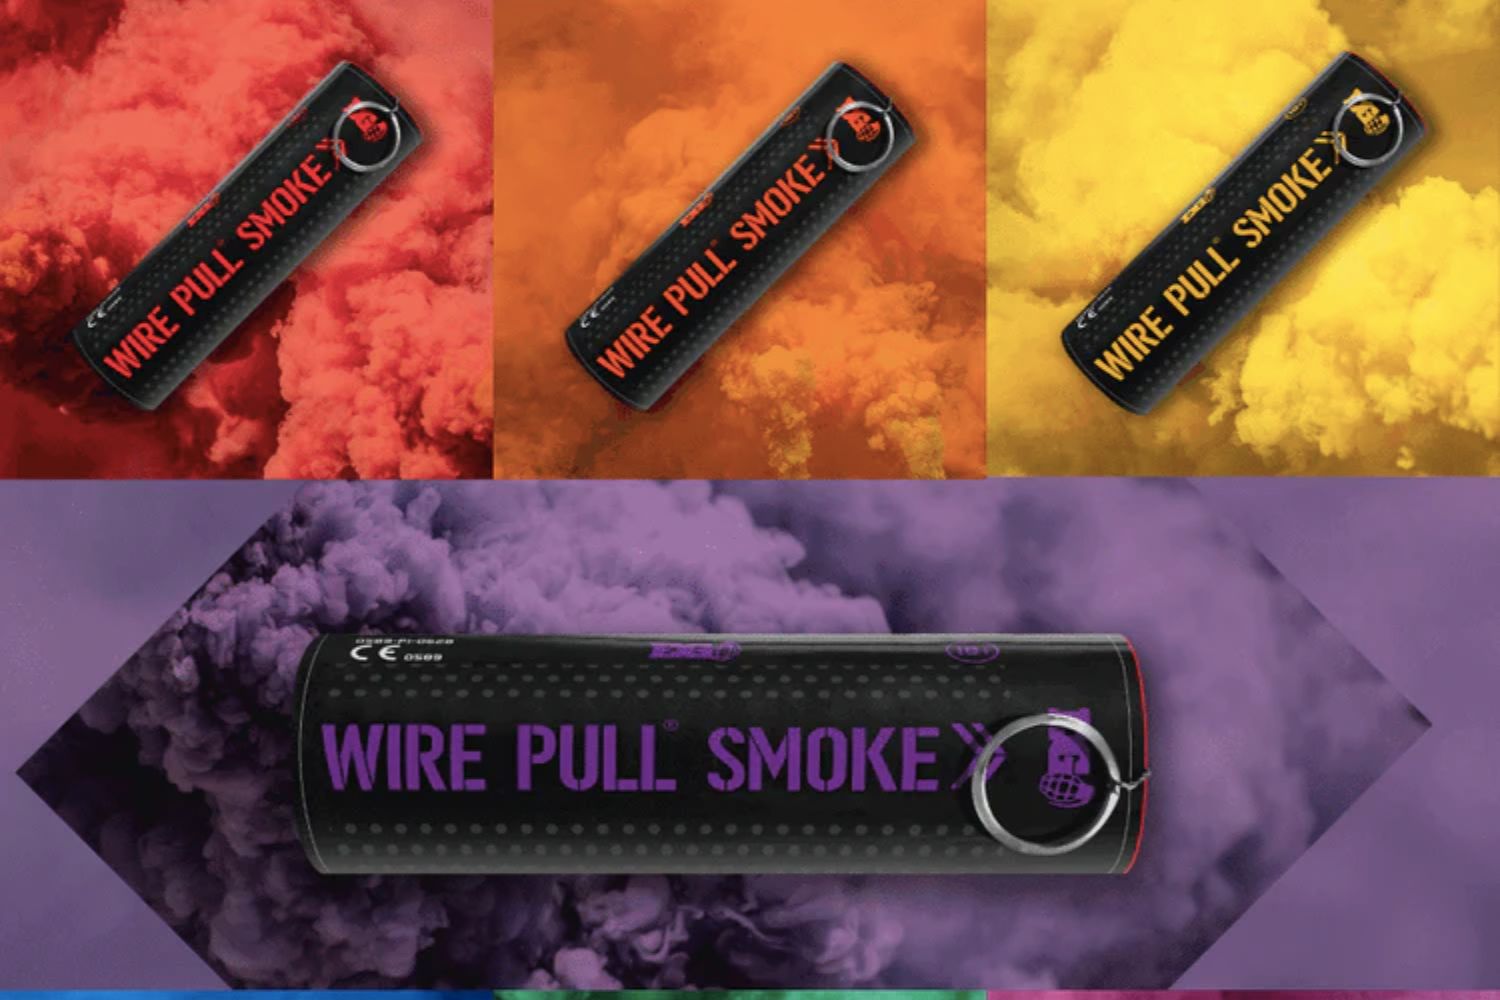 smoke bomb product from Shutter Bombs